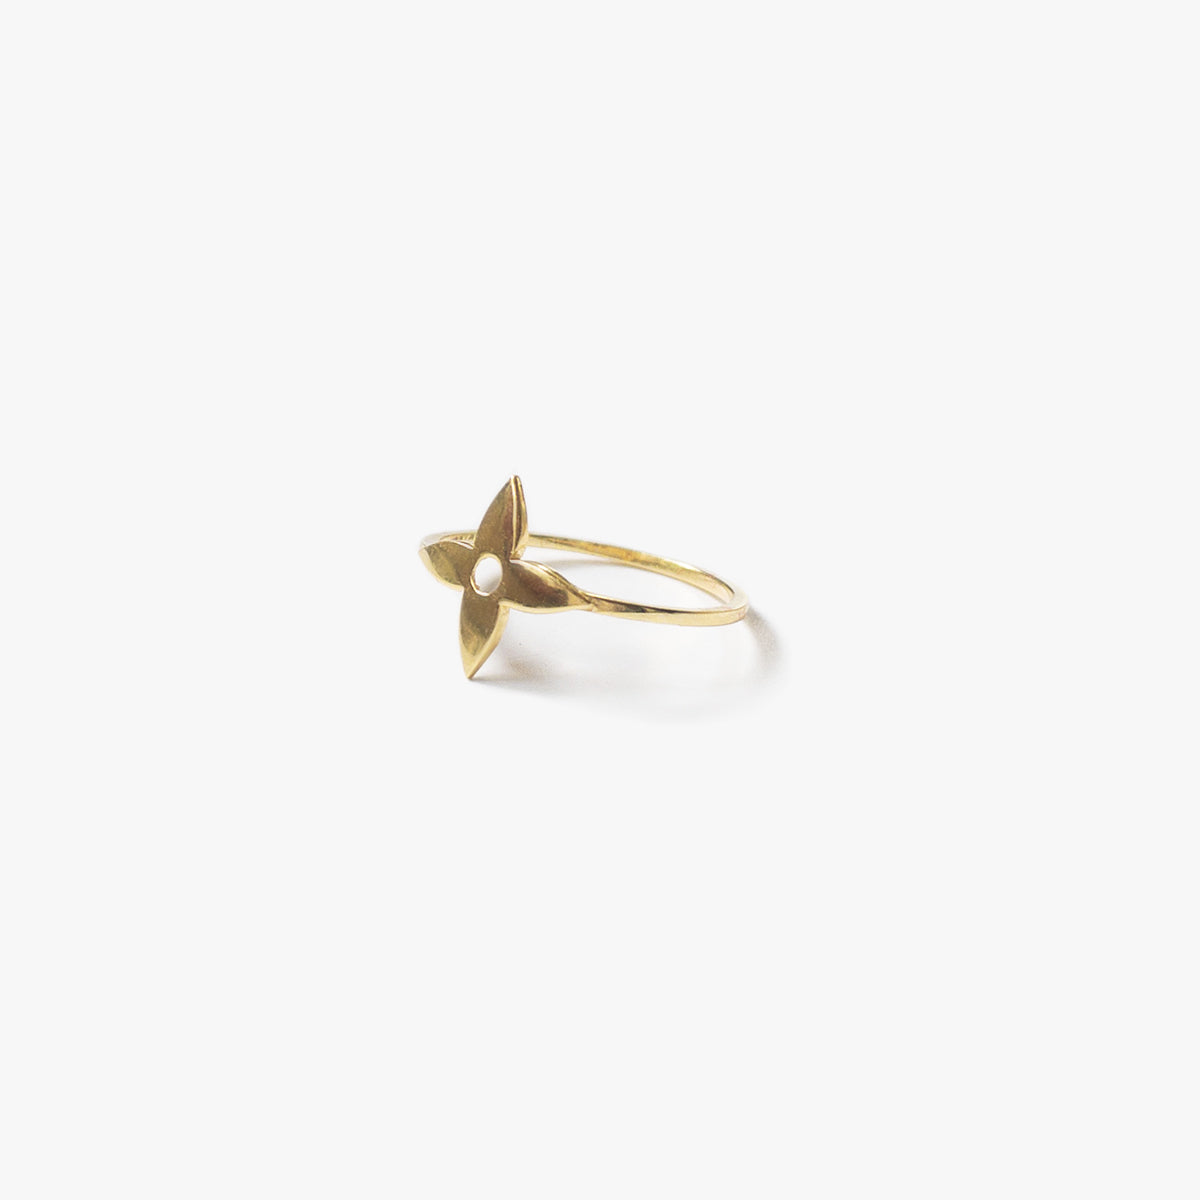 The Luster Ring in Solid Gold